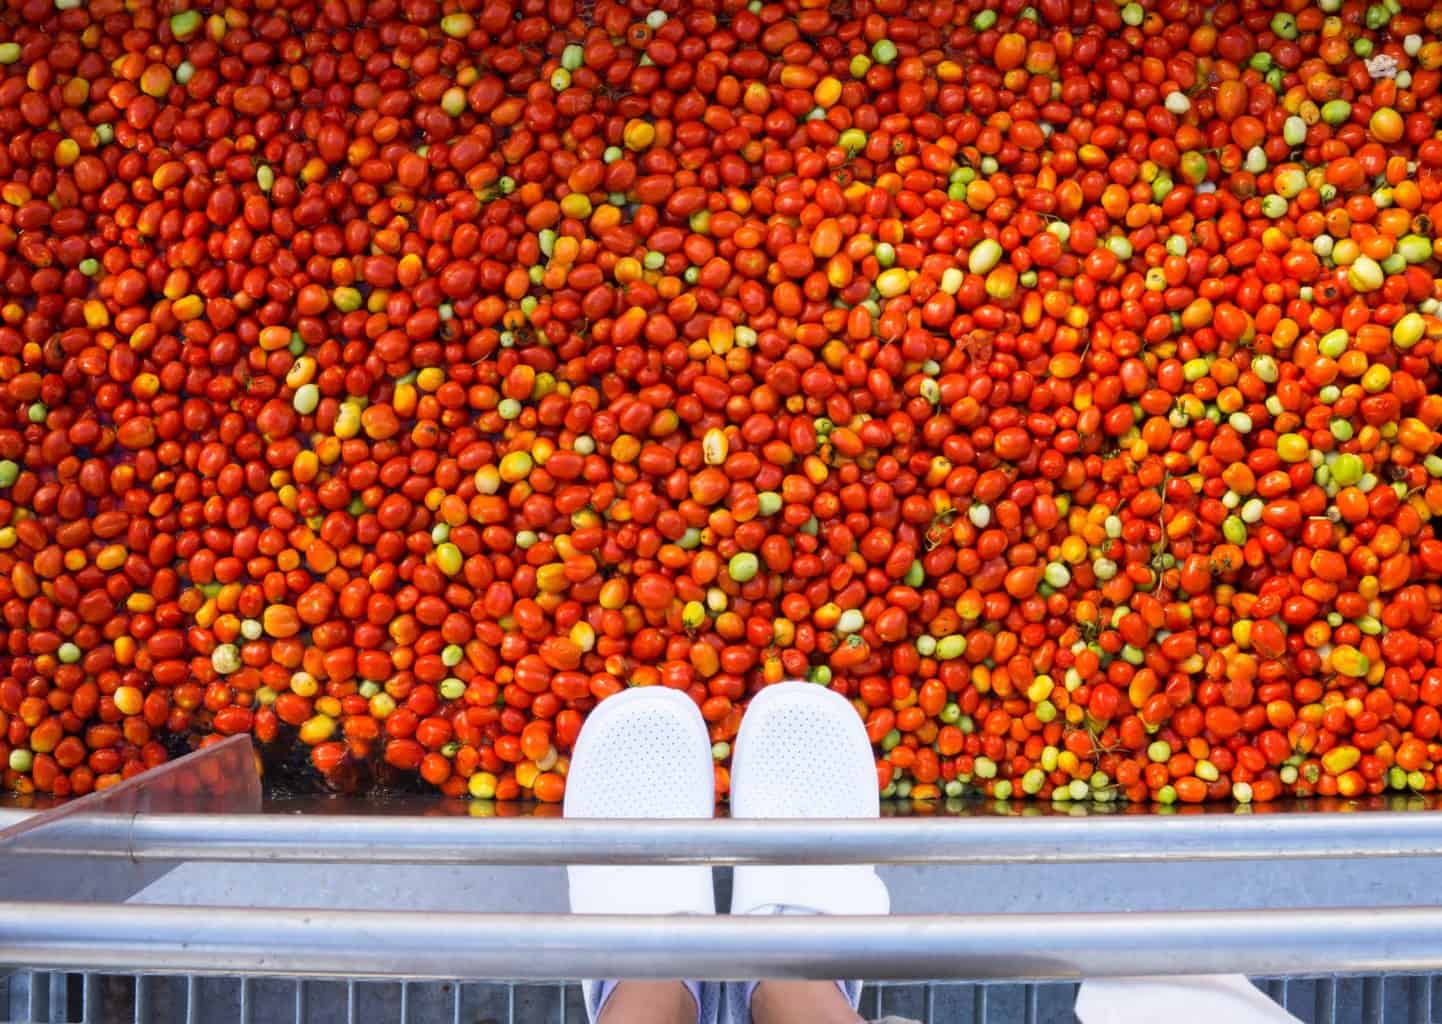 FARMING | The farm to fork journey of a Knorr tomato